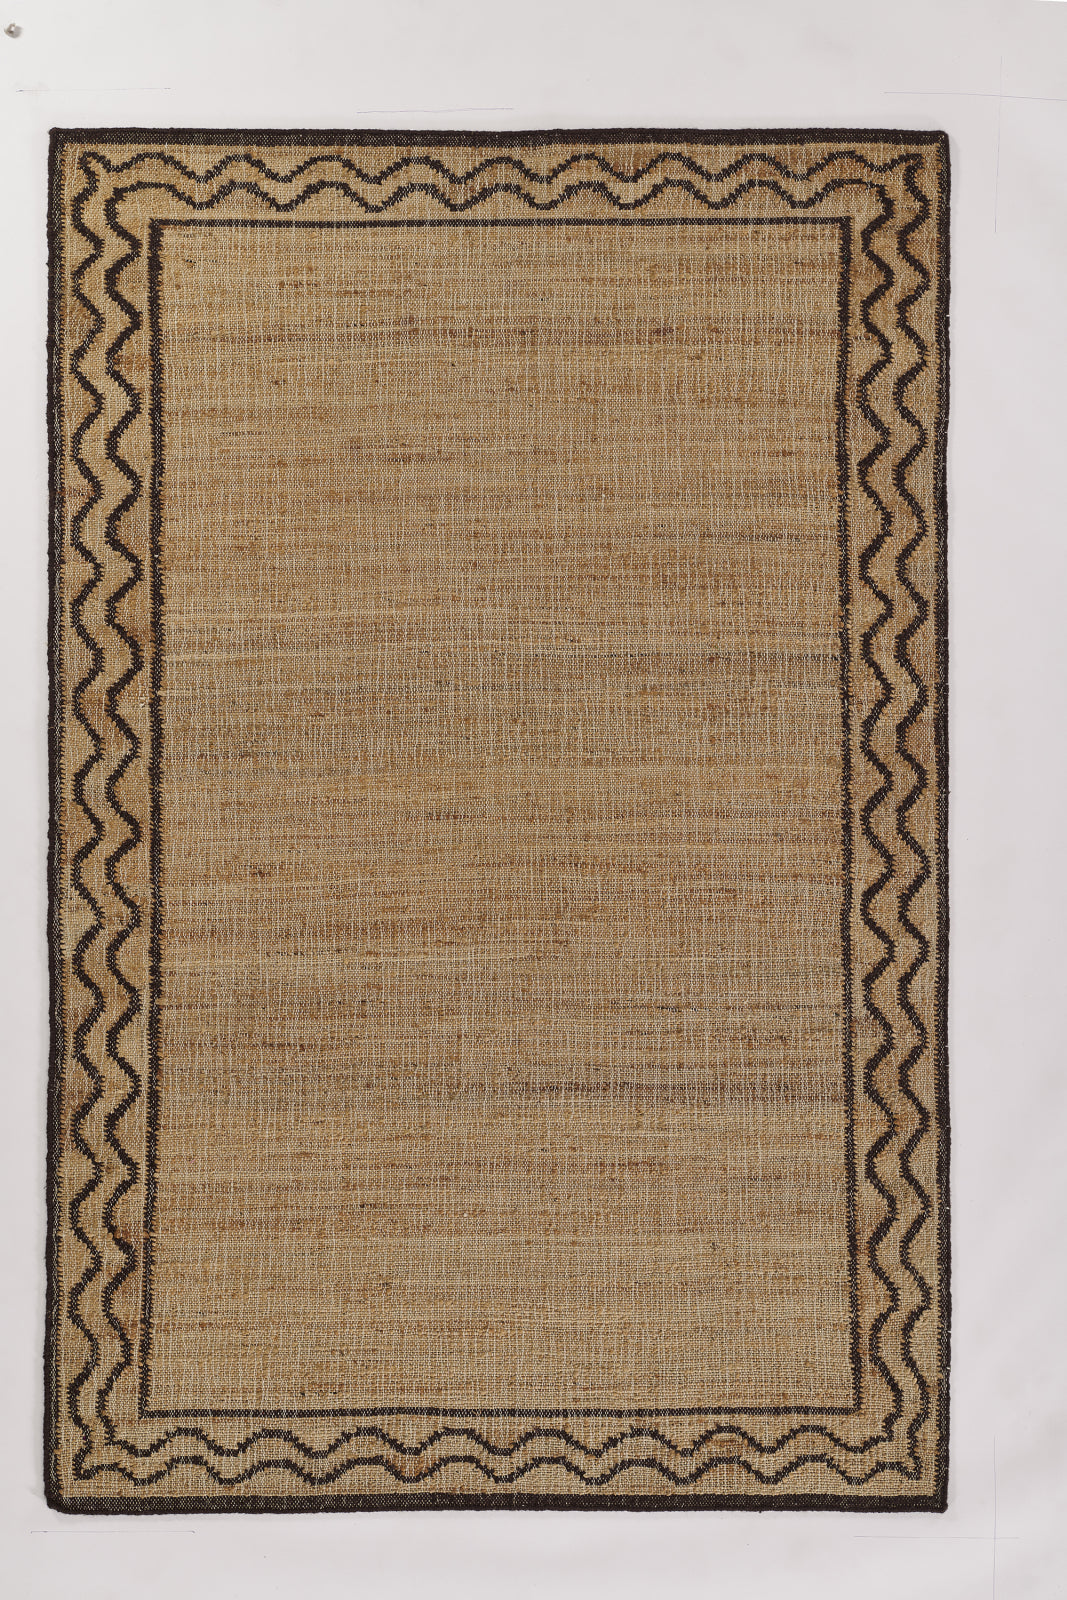 Momeni Orchard Ripple ORC-1 Brown Area Rug by Erin Gates main image